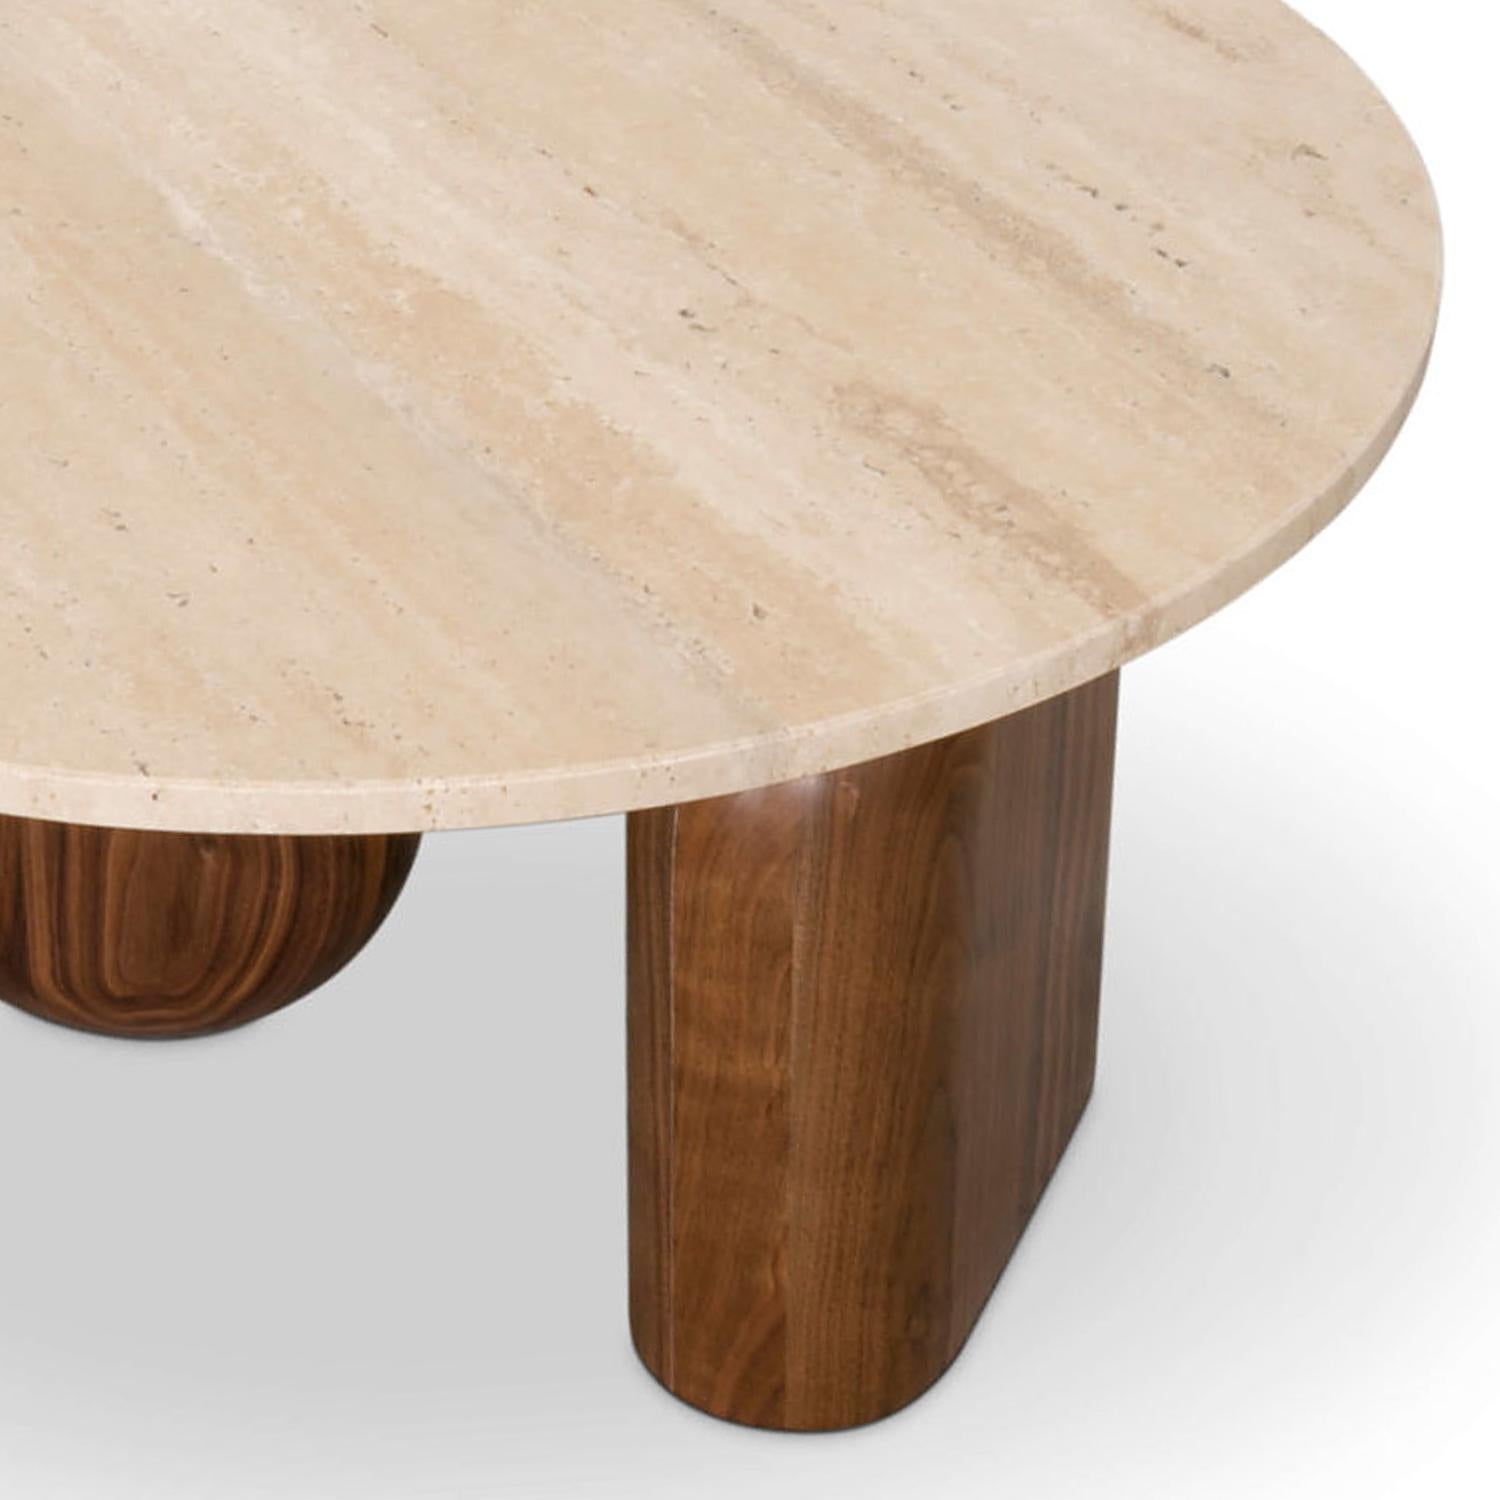 Hand-Crafted Tessa Round Coffee Table